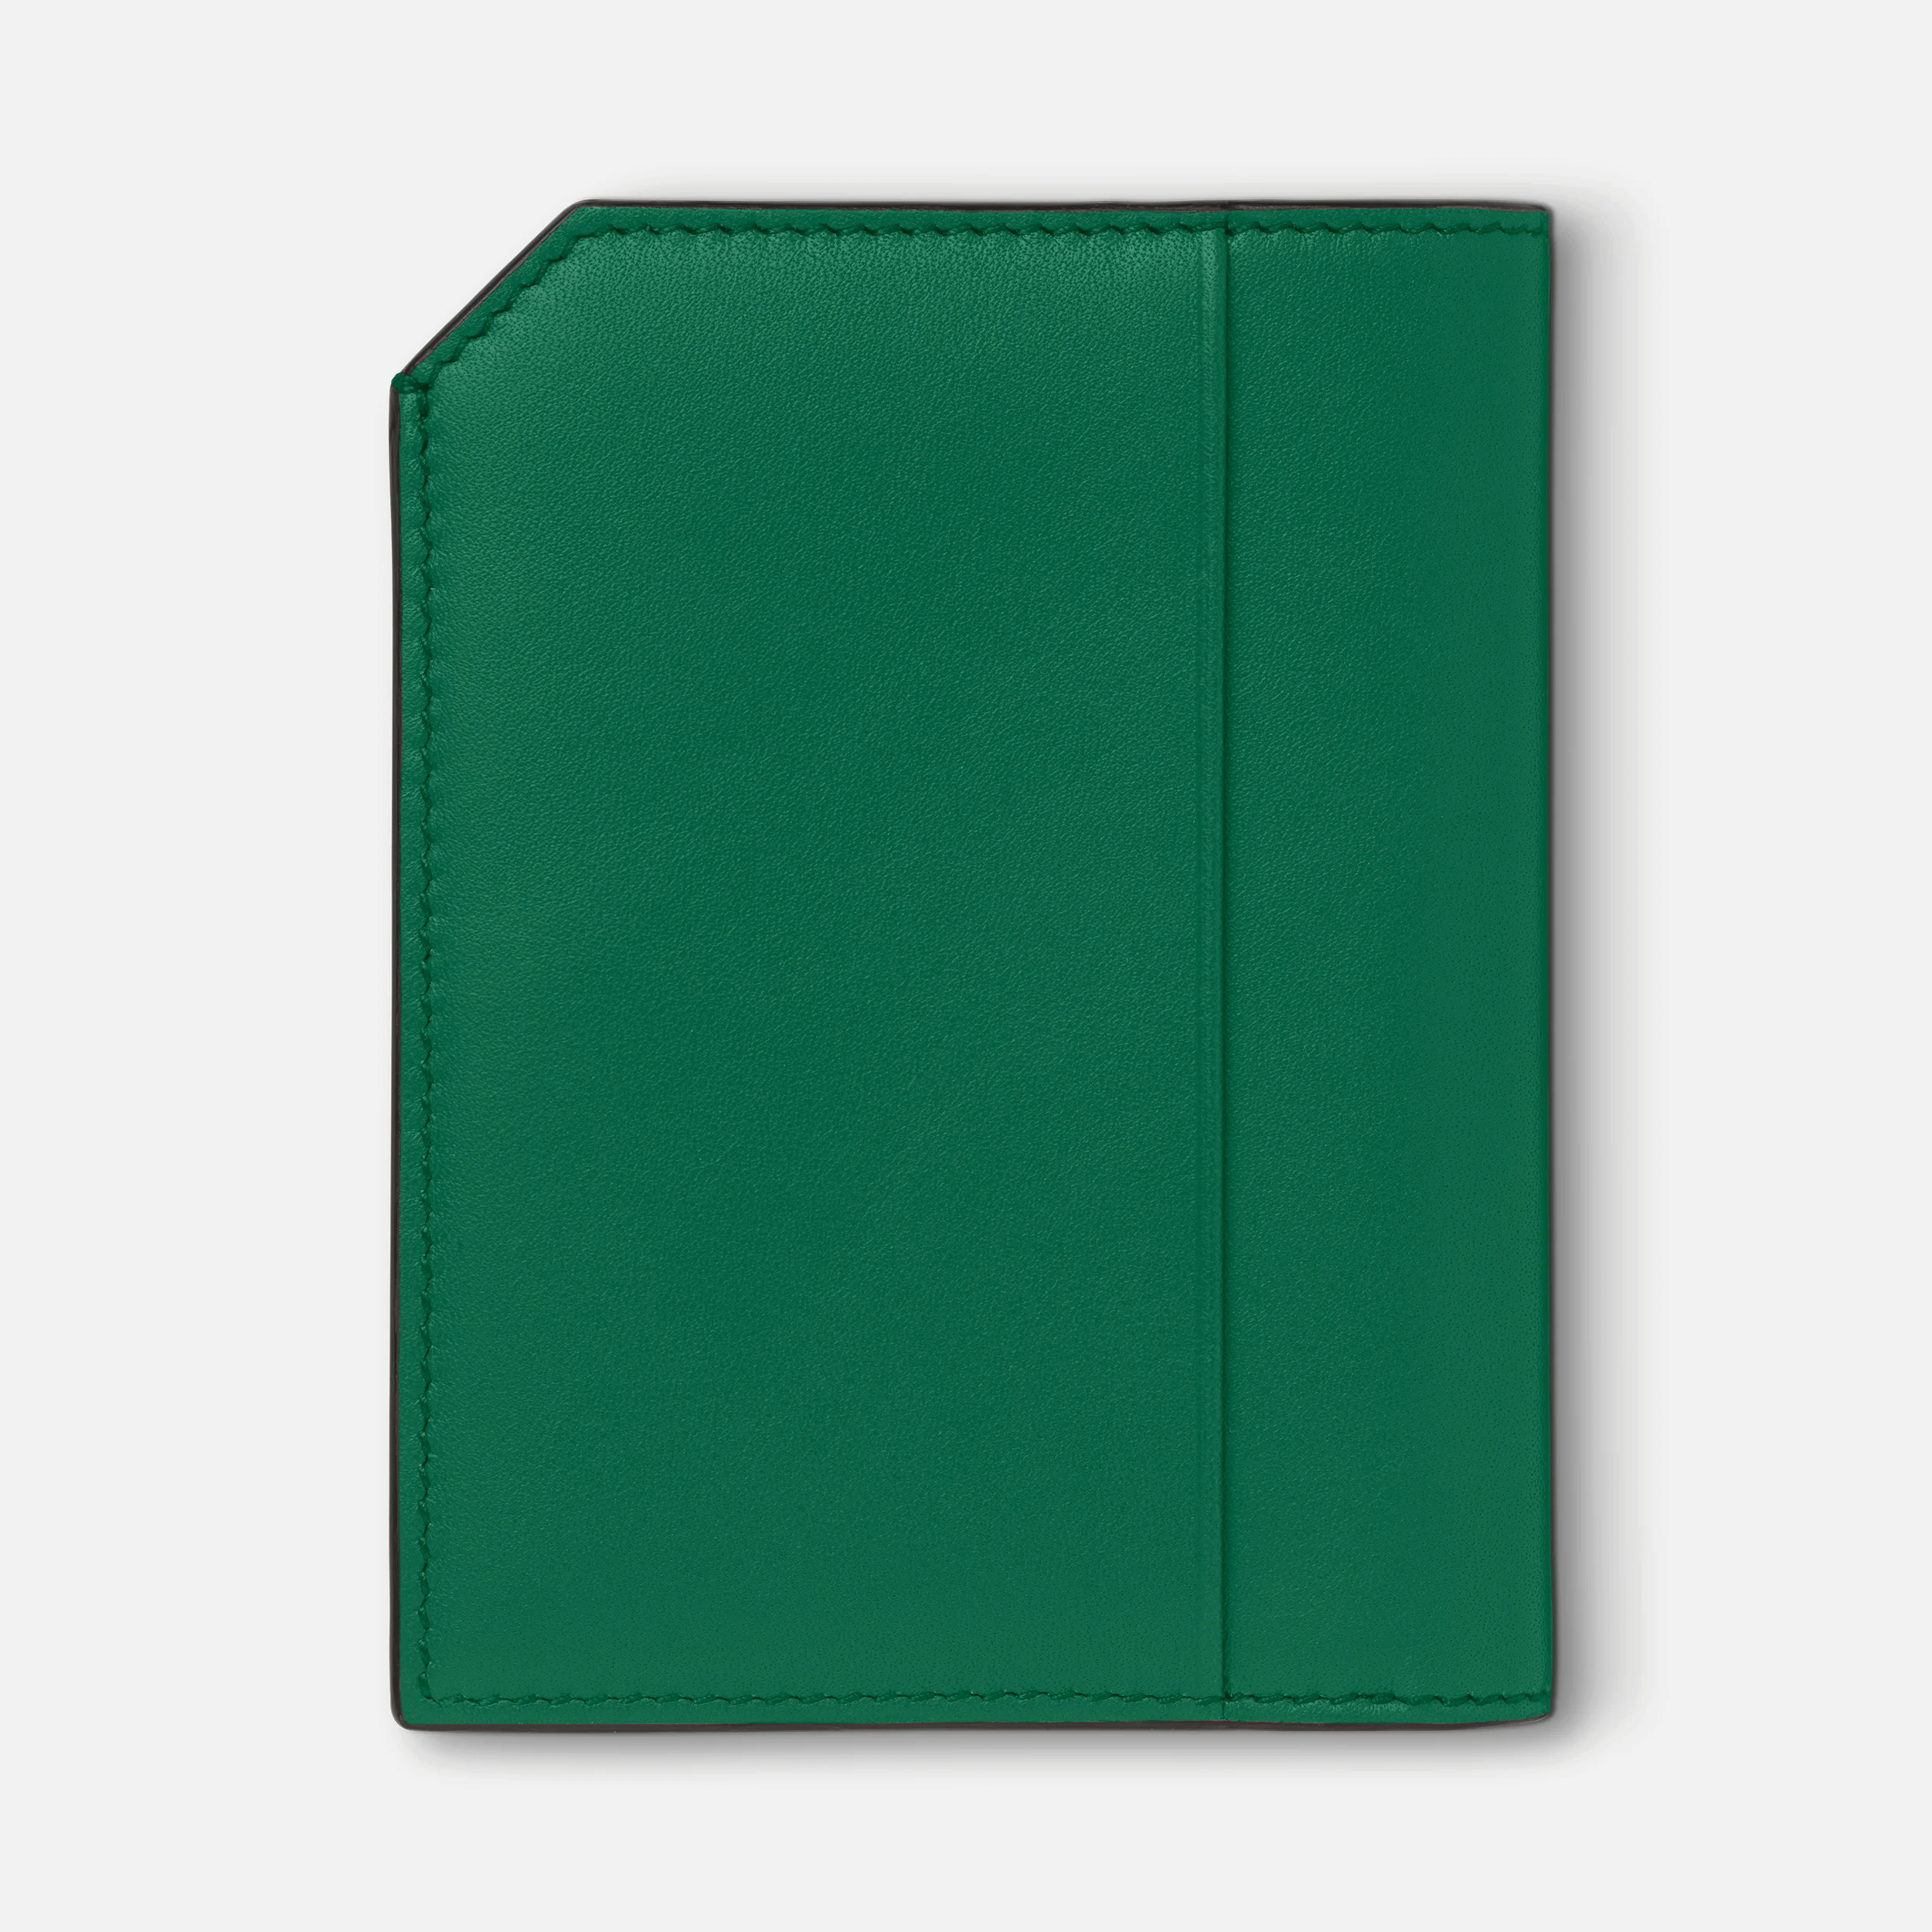 Montblanc Meisterstuck Selection Soft Mini Wallet 4cc Scottish Green - Pencraft the boutique